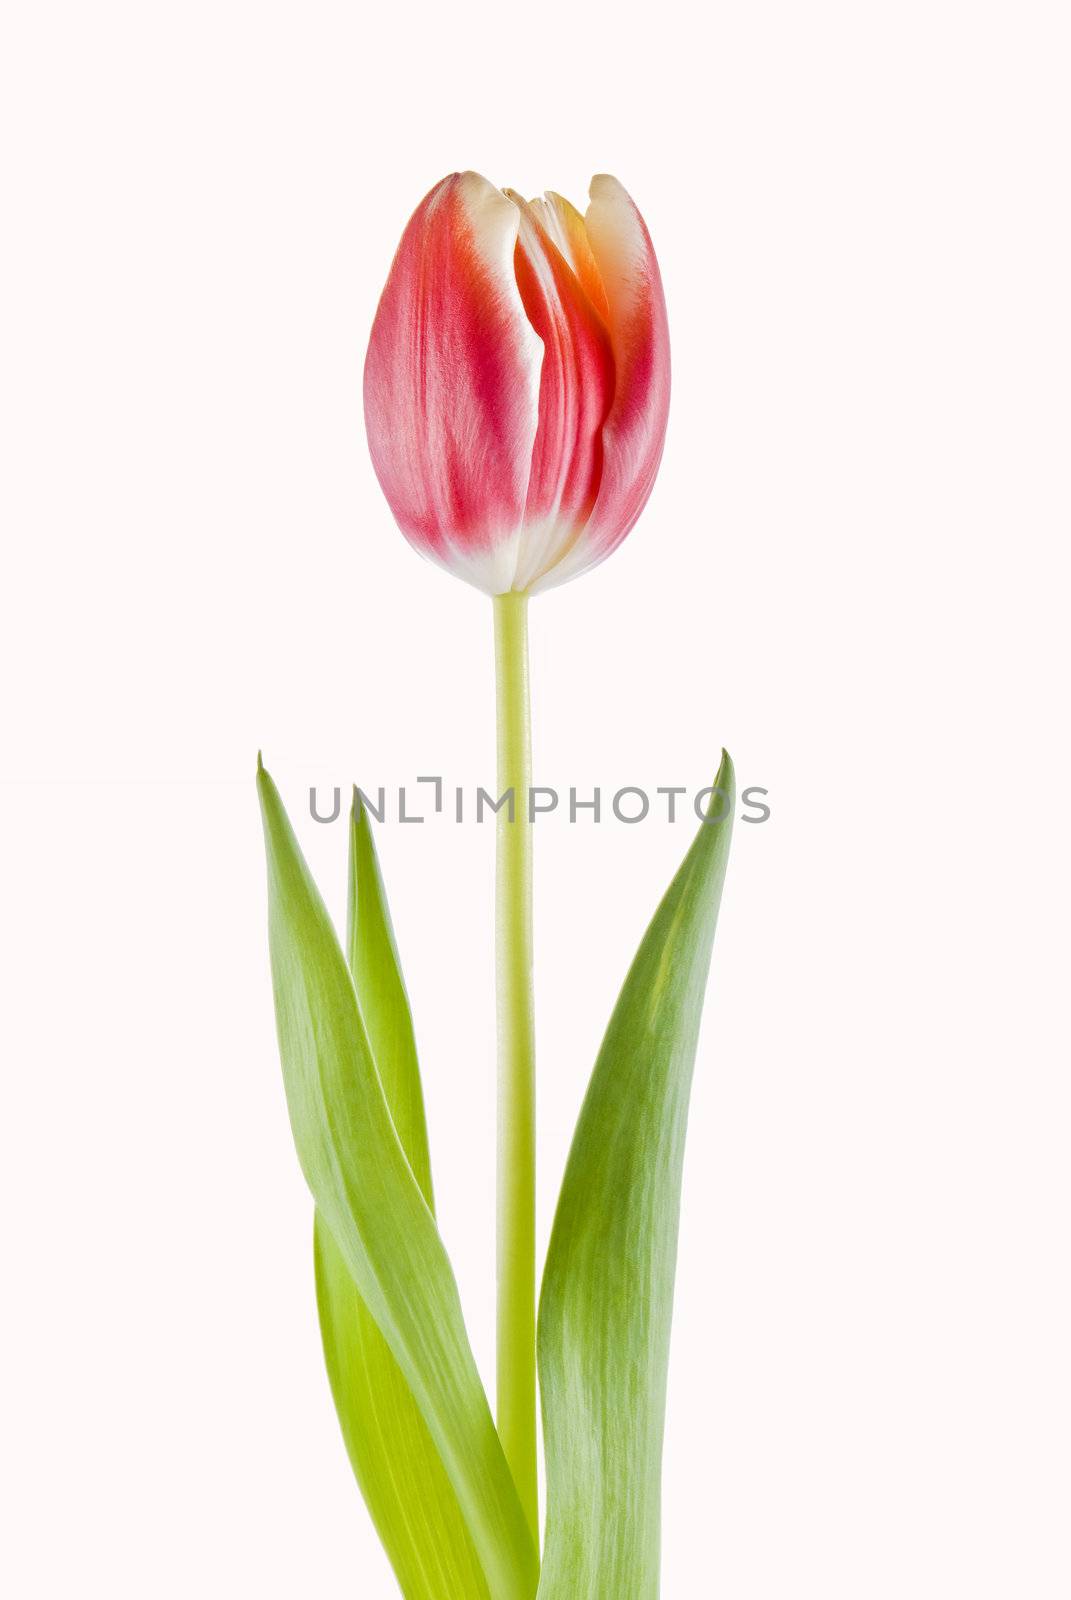 One tulip isolated over white background